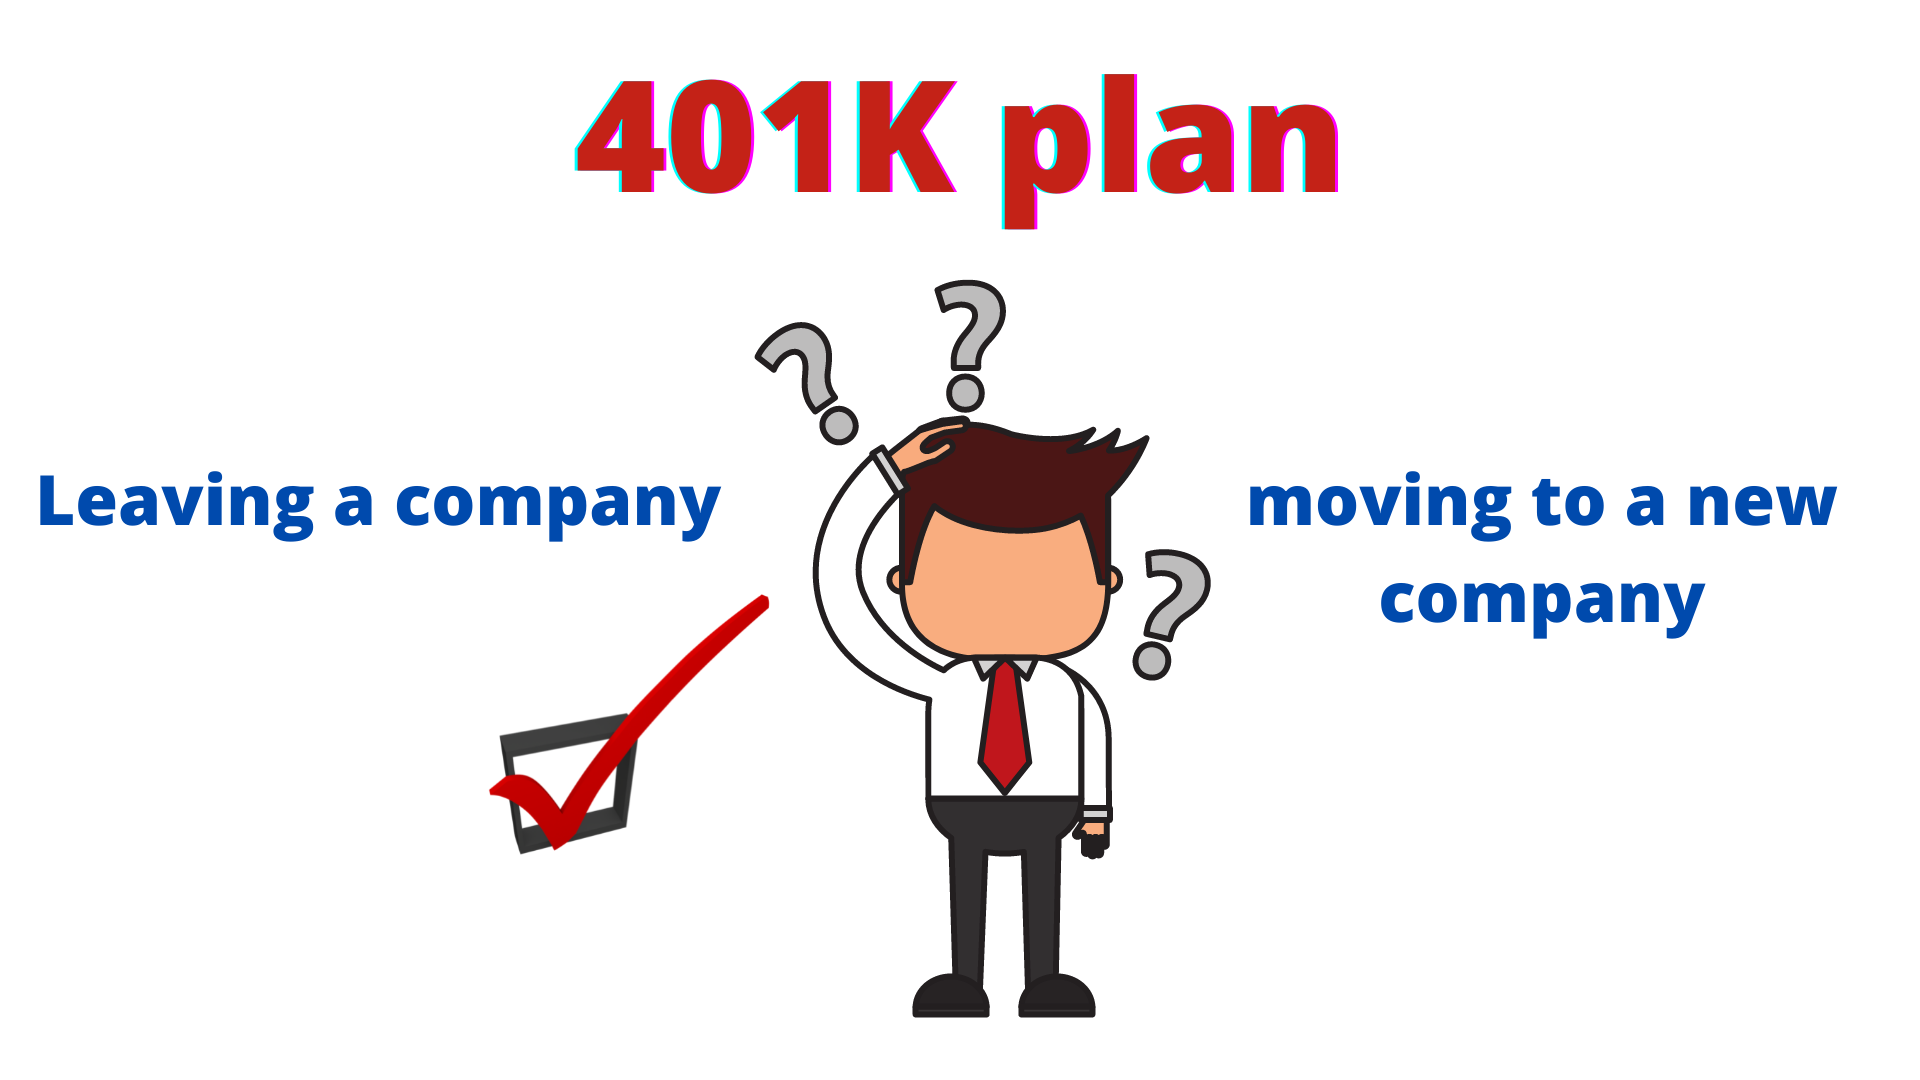 What to do with 401k after leaving a job?